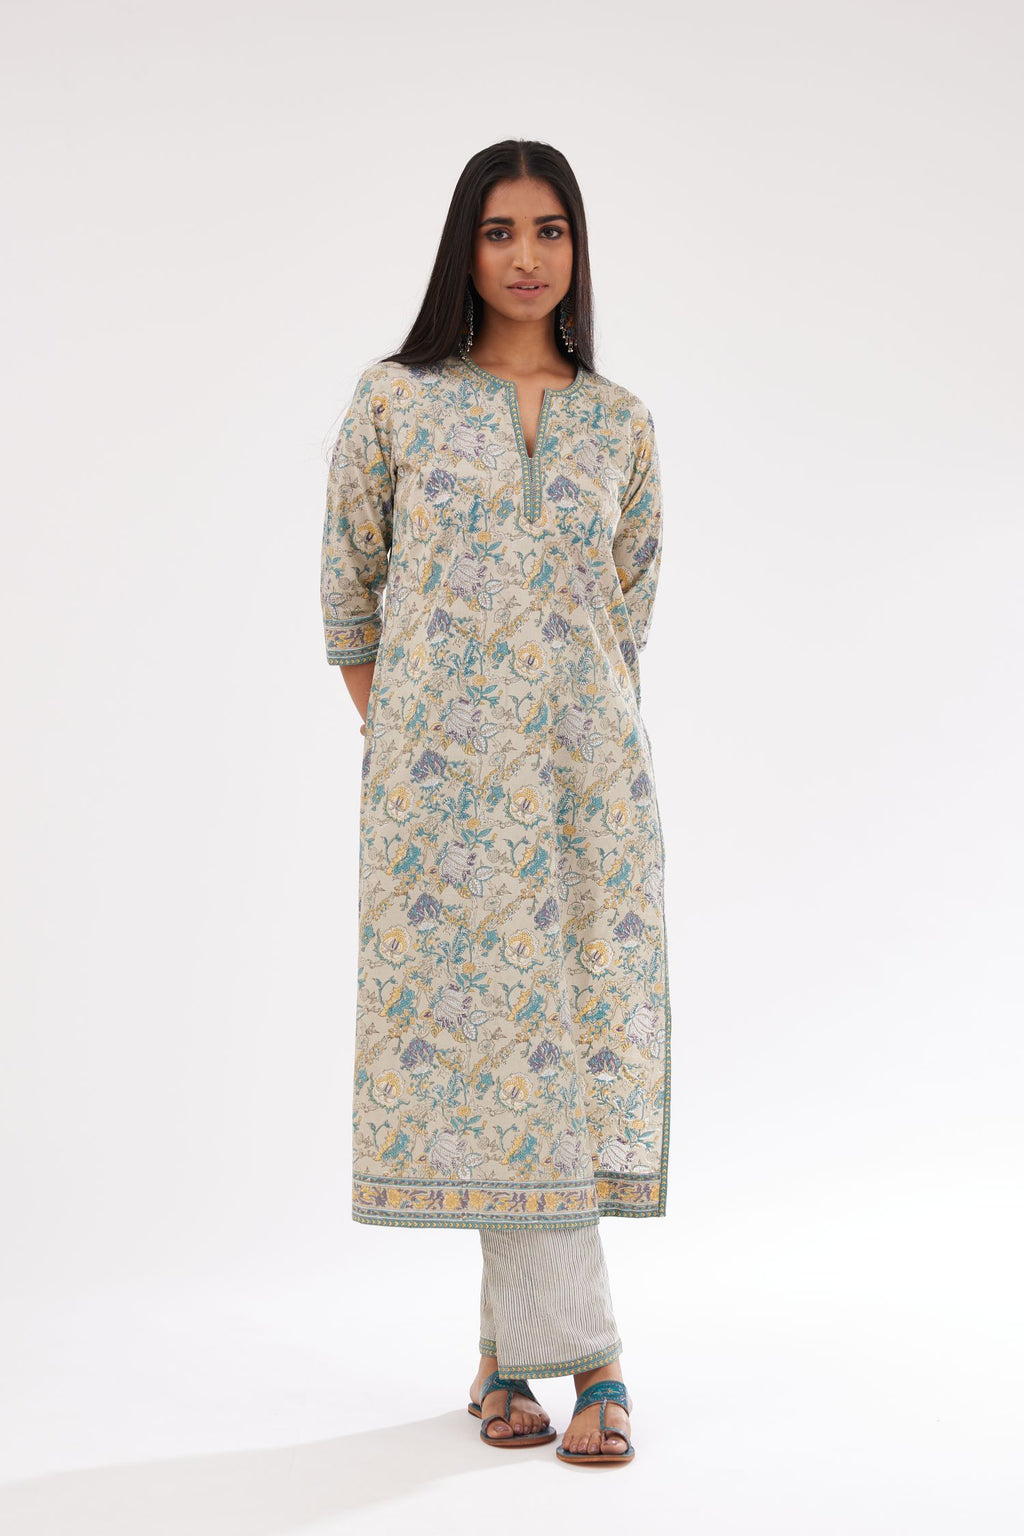 Grey and blue straight kurta set with all-over chintz block print & side slits.